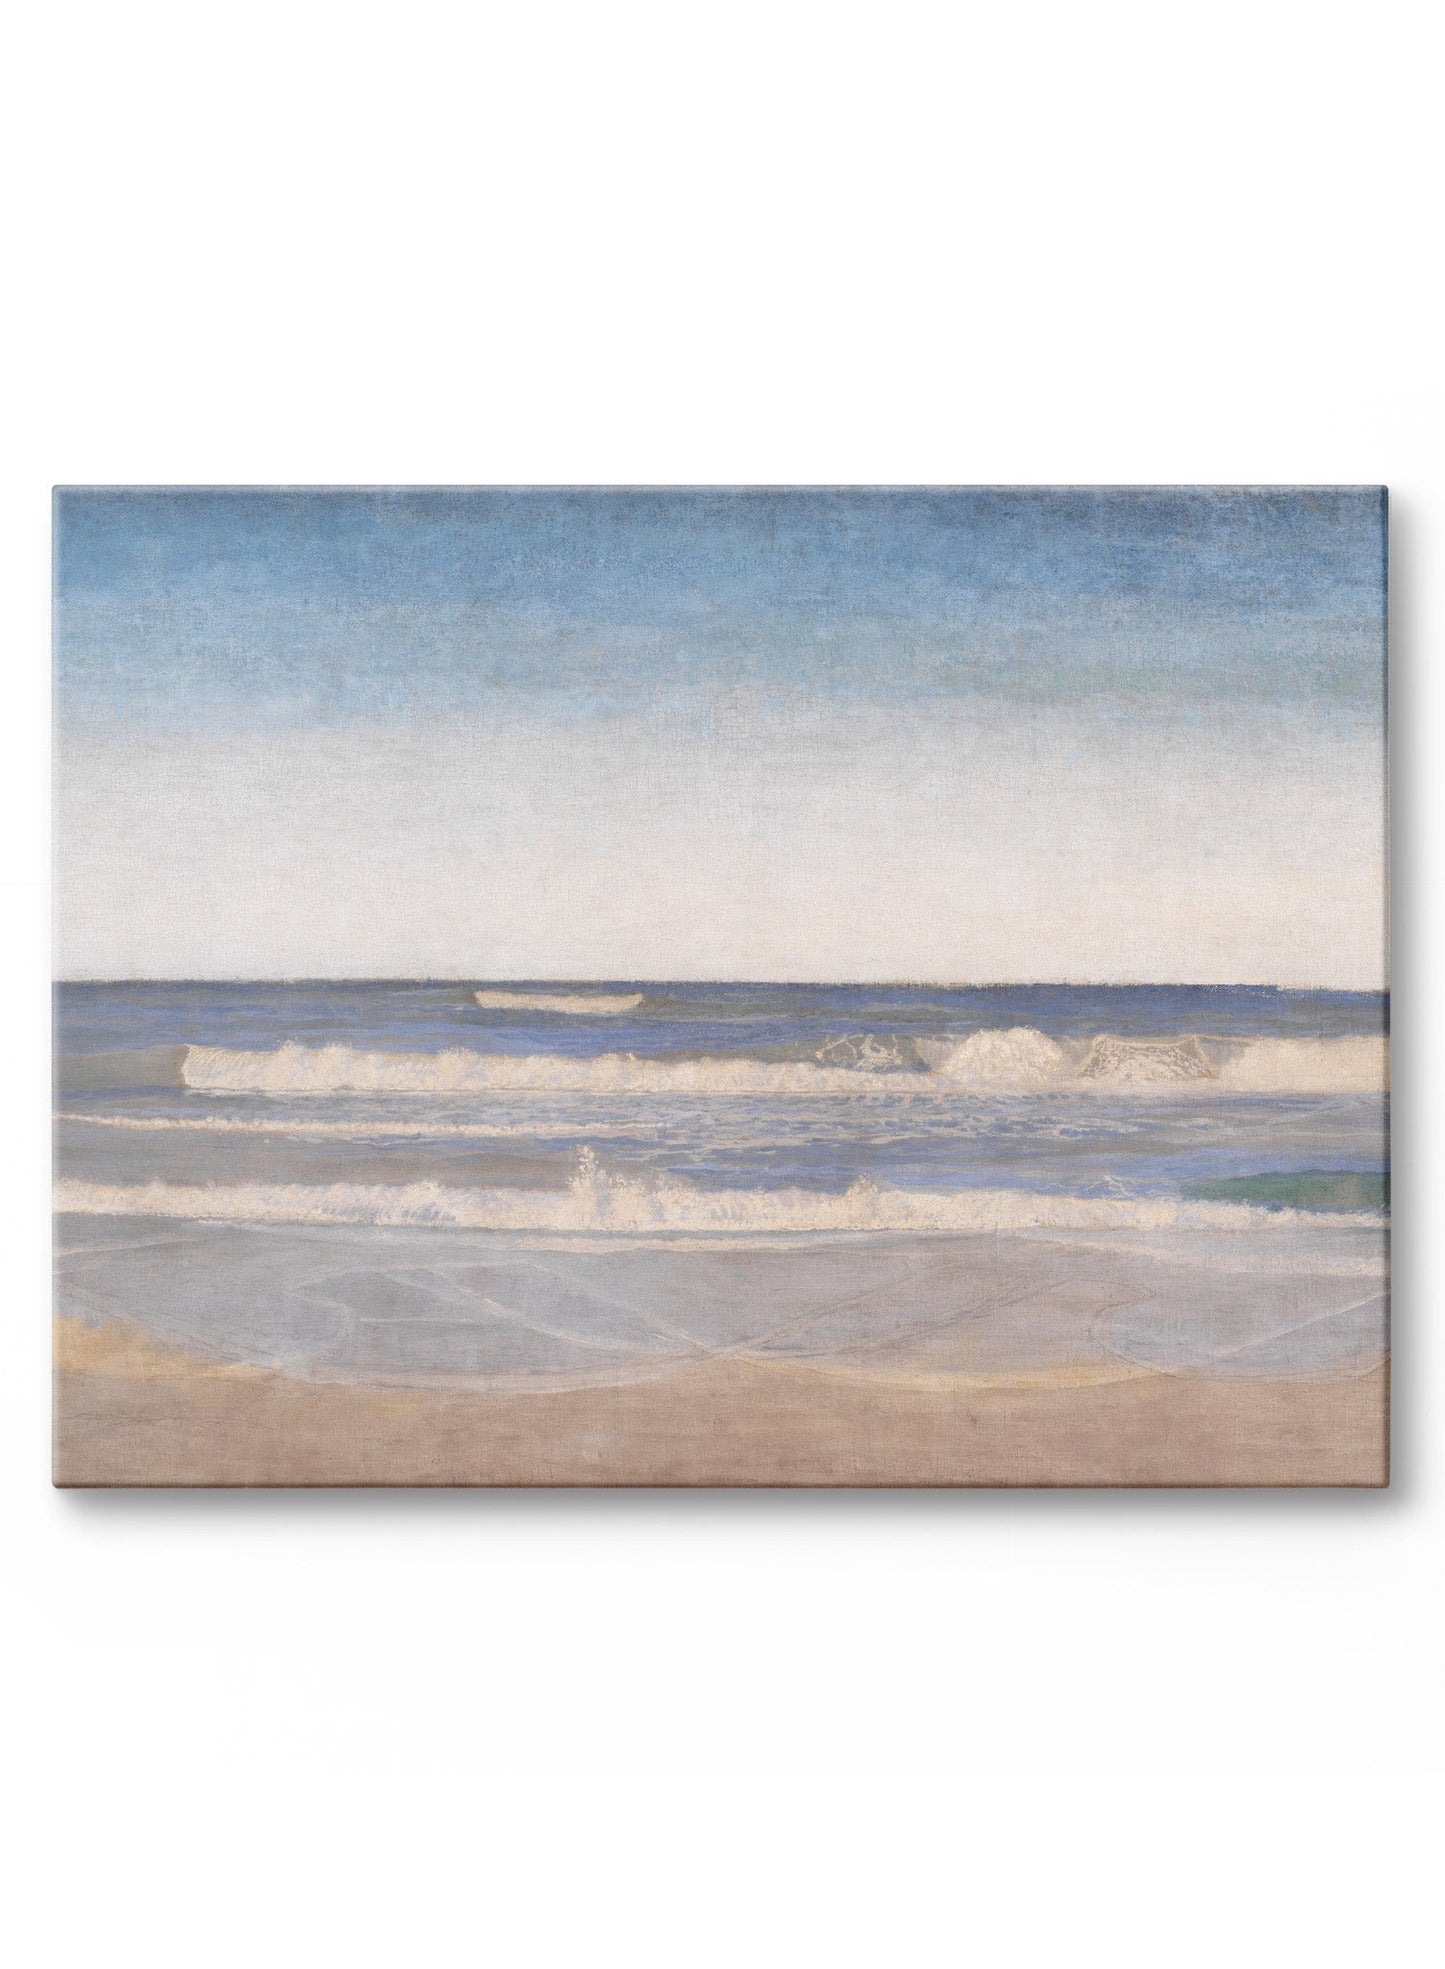 Tides of Tranquility, Canvas